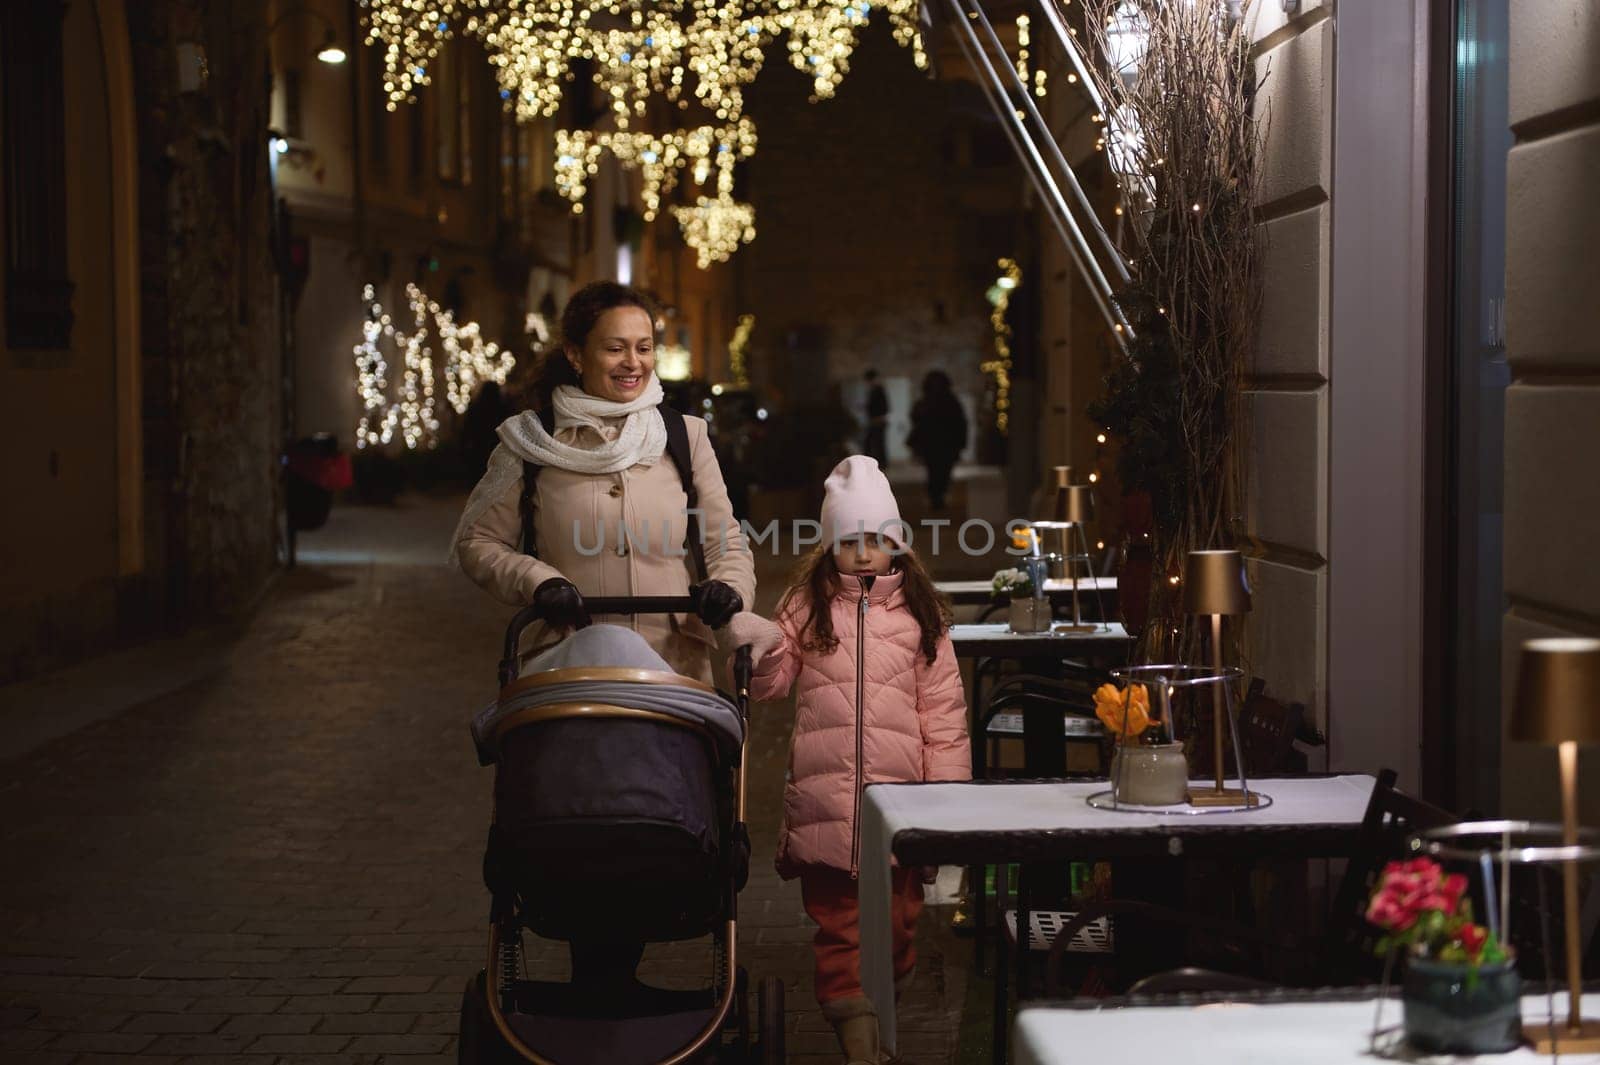 Authentic lifestyle portrait of a happy family of a mom holding the hand of her little daughter, pushing the baby pram, walking together on the street illuminated by festive lights in the night time